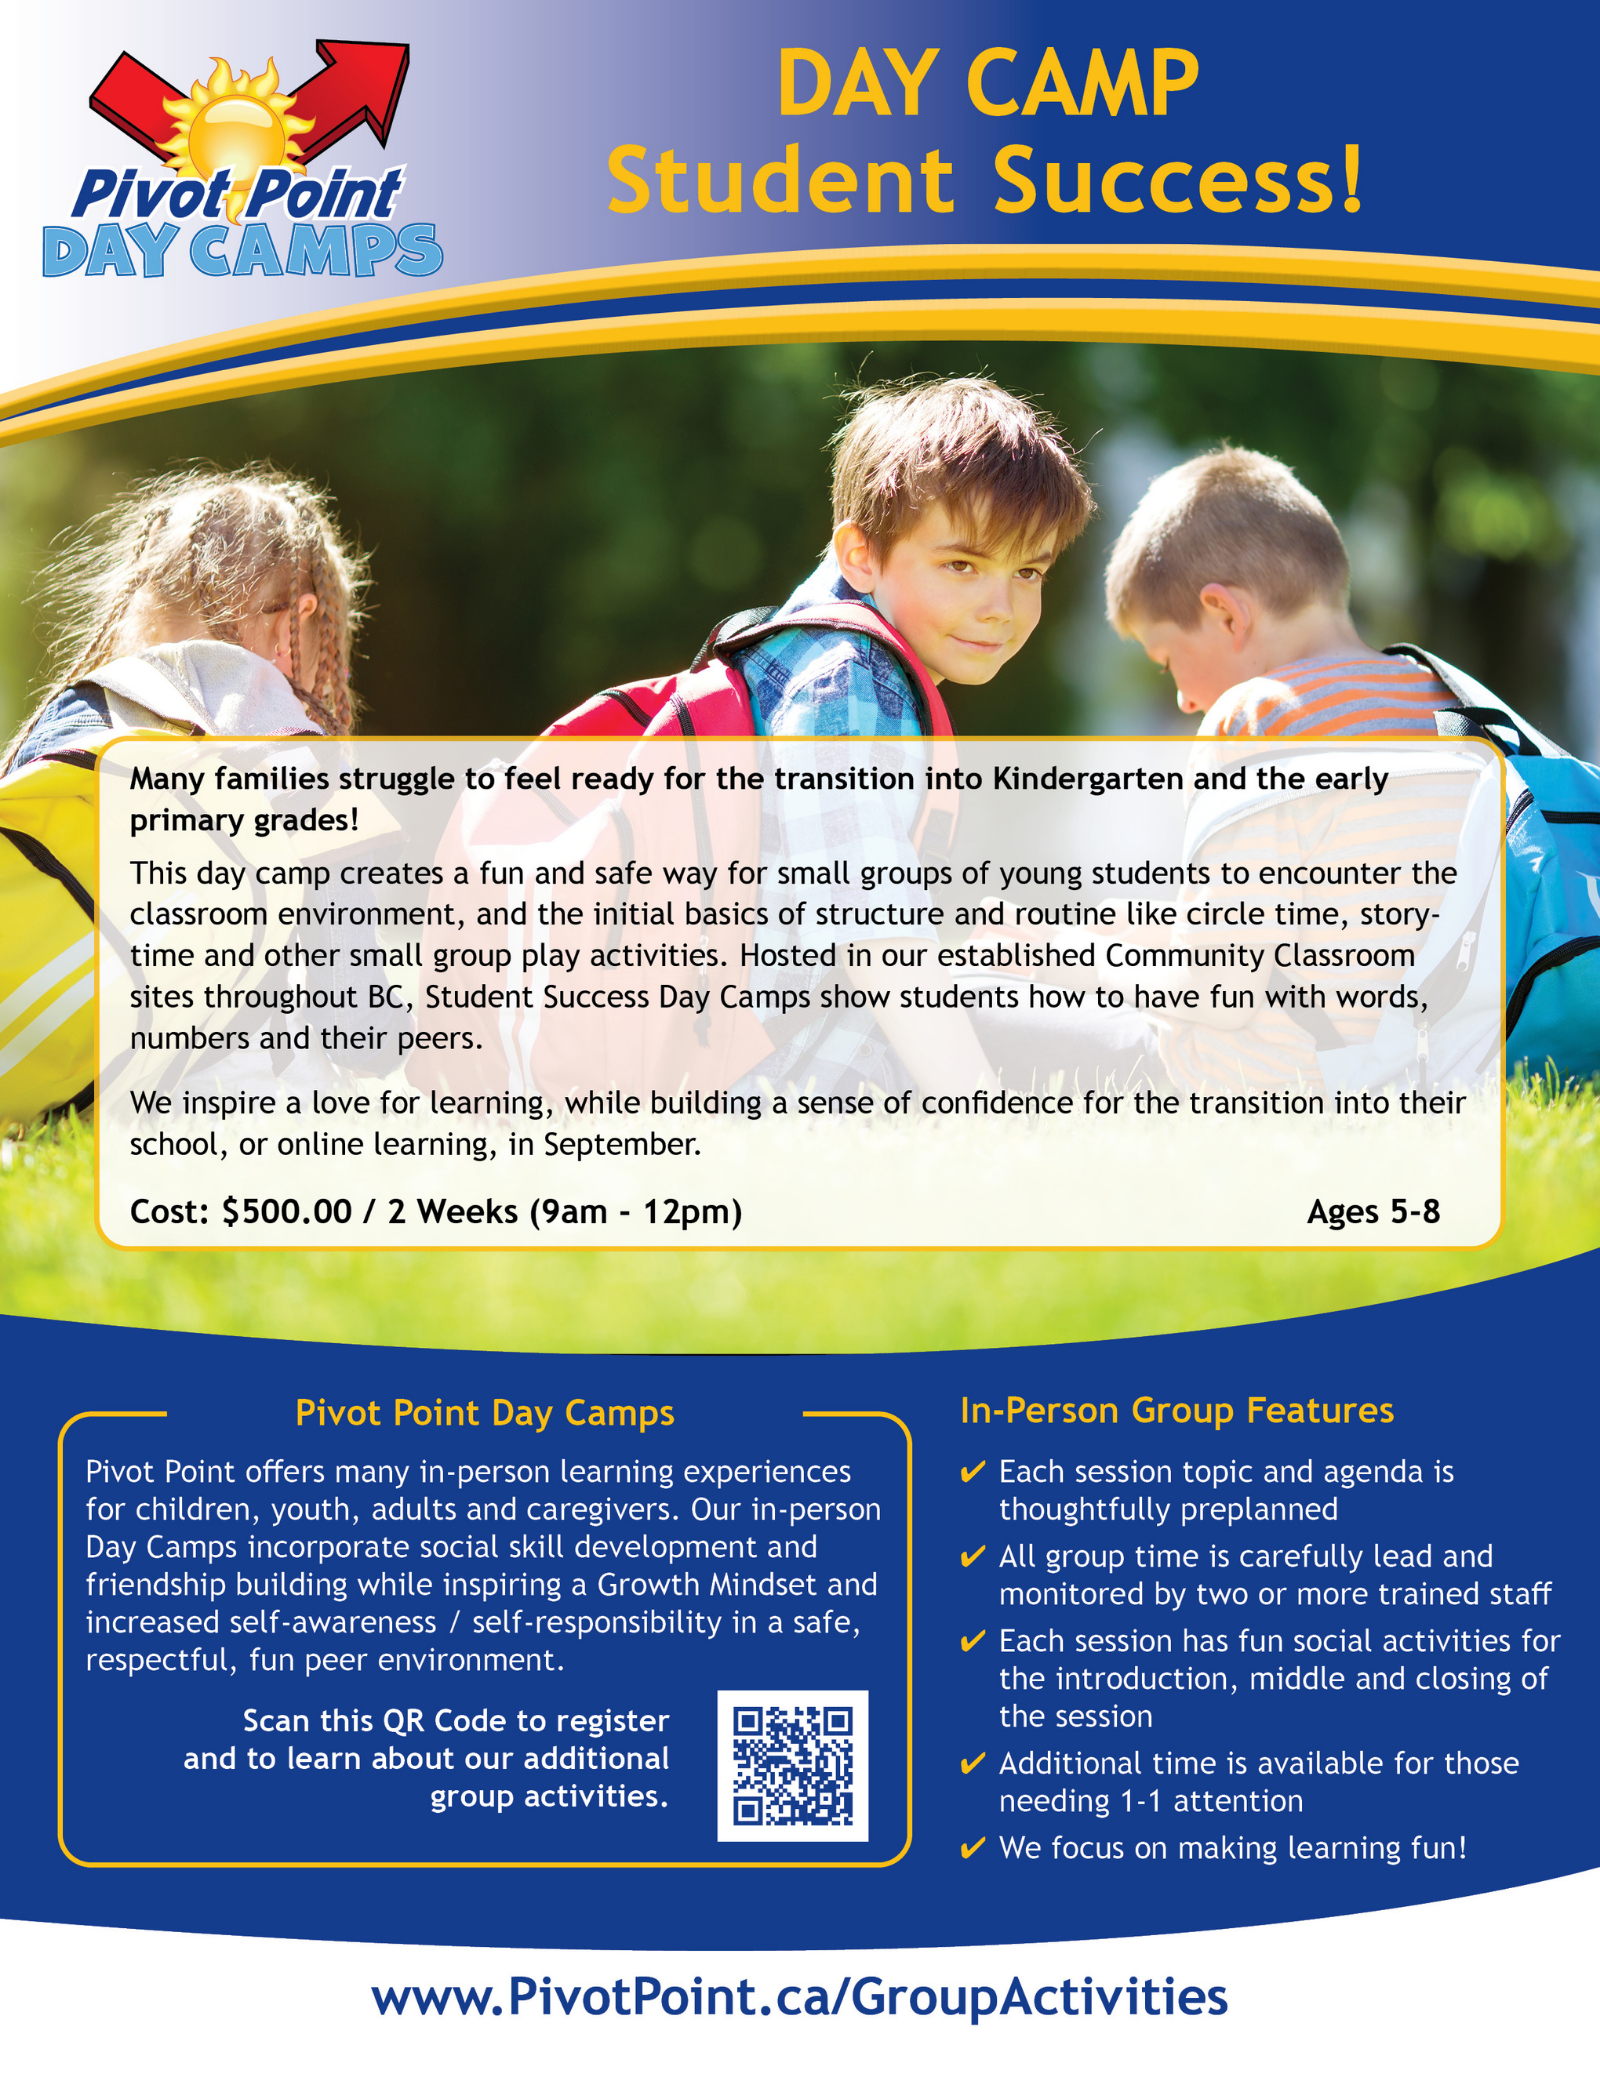 Summer Day Camp - Student Success: Chilliwack